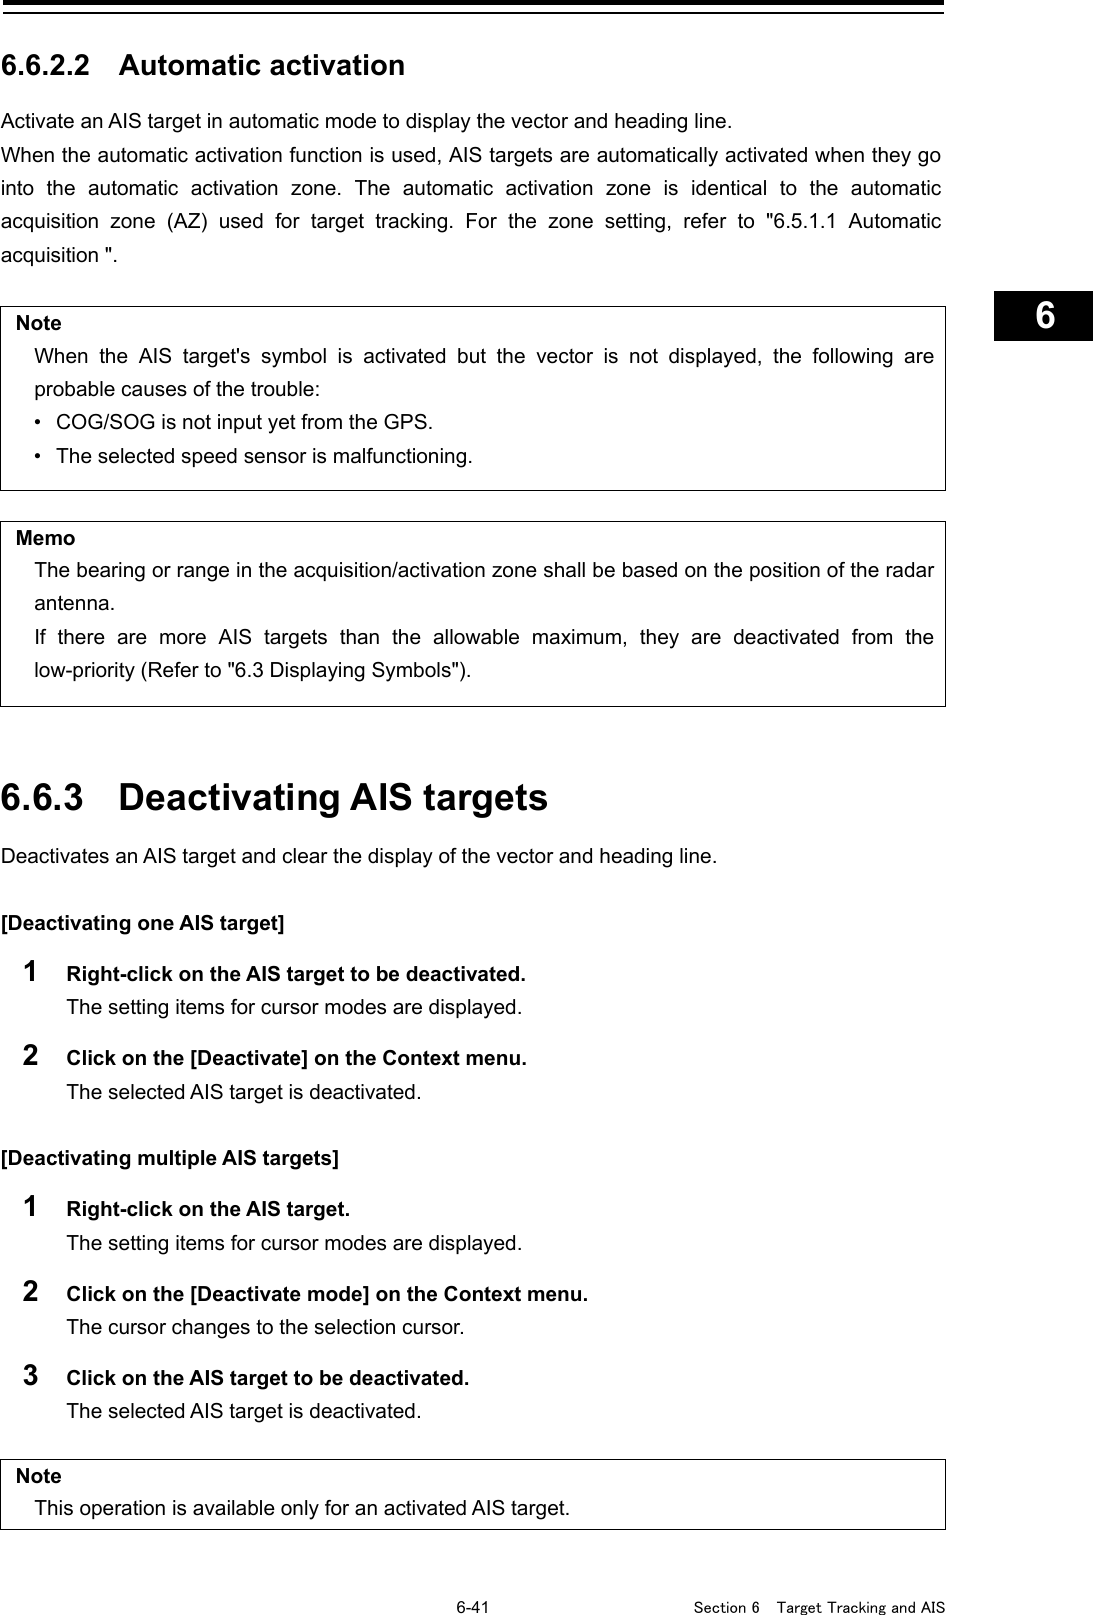   6-41  Section 6  Target Tracking and AIS    1  2  3  4  5  6  7  8  9  10  11  12  13  14  15  16  17  18  19  20  21  22  23  24  25  26  27      6.6.2.2 Automatic activation Activate an AIS target in automatic mode to display the vector and heading line. When the automatic activation function is used, AIS targets are automatically activated when they go into the automatic activation zone. The automatic activation zone is identical to the automatic acquisition zone (AZ) used for target tracking. For the zone setting, refer to &quot;6.5.1.1 Automatic acquisition &quot;.  Note When the AIS target&apos;s symbol is activated but the vector is not displayed, the following are probable causes of the trouble: • COG/SOG is not input yet from the GPS. • The selected speed sensor is malfunctioning.   Memo The bearing or range in the acquisition/activation zone shall be based on the position of the radar antenna. If there are more AIS targets than the allowable maximum, they are deactivated from the low-priority (Refer to &quot;6.3 Displaying Symbols&quot;).   6.6.3 Deactivating AIS targets Deactivates an AIS target and clear the display of the vector and heading line.  [Deactivating one AIS target] 1  Right-click on the AIS target to be deactivated. The setting items for cursor modes are displayed. 2  Click on the [Deactivate] on the Context menu. The selected AIS target is deactivated.  [Deactivating multiple AIS targets] 1  Right-click on the AIS target. The setting items for cursor modes are displayed. 2  Click on the [Deactivate mode] on the Context menu. The cursor changes to the selection cursor. 3  Click on the AIS target to be deactivated. The selected AIS target is deactivated.  Note This operation is available only for an activated AIS target.    